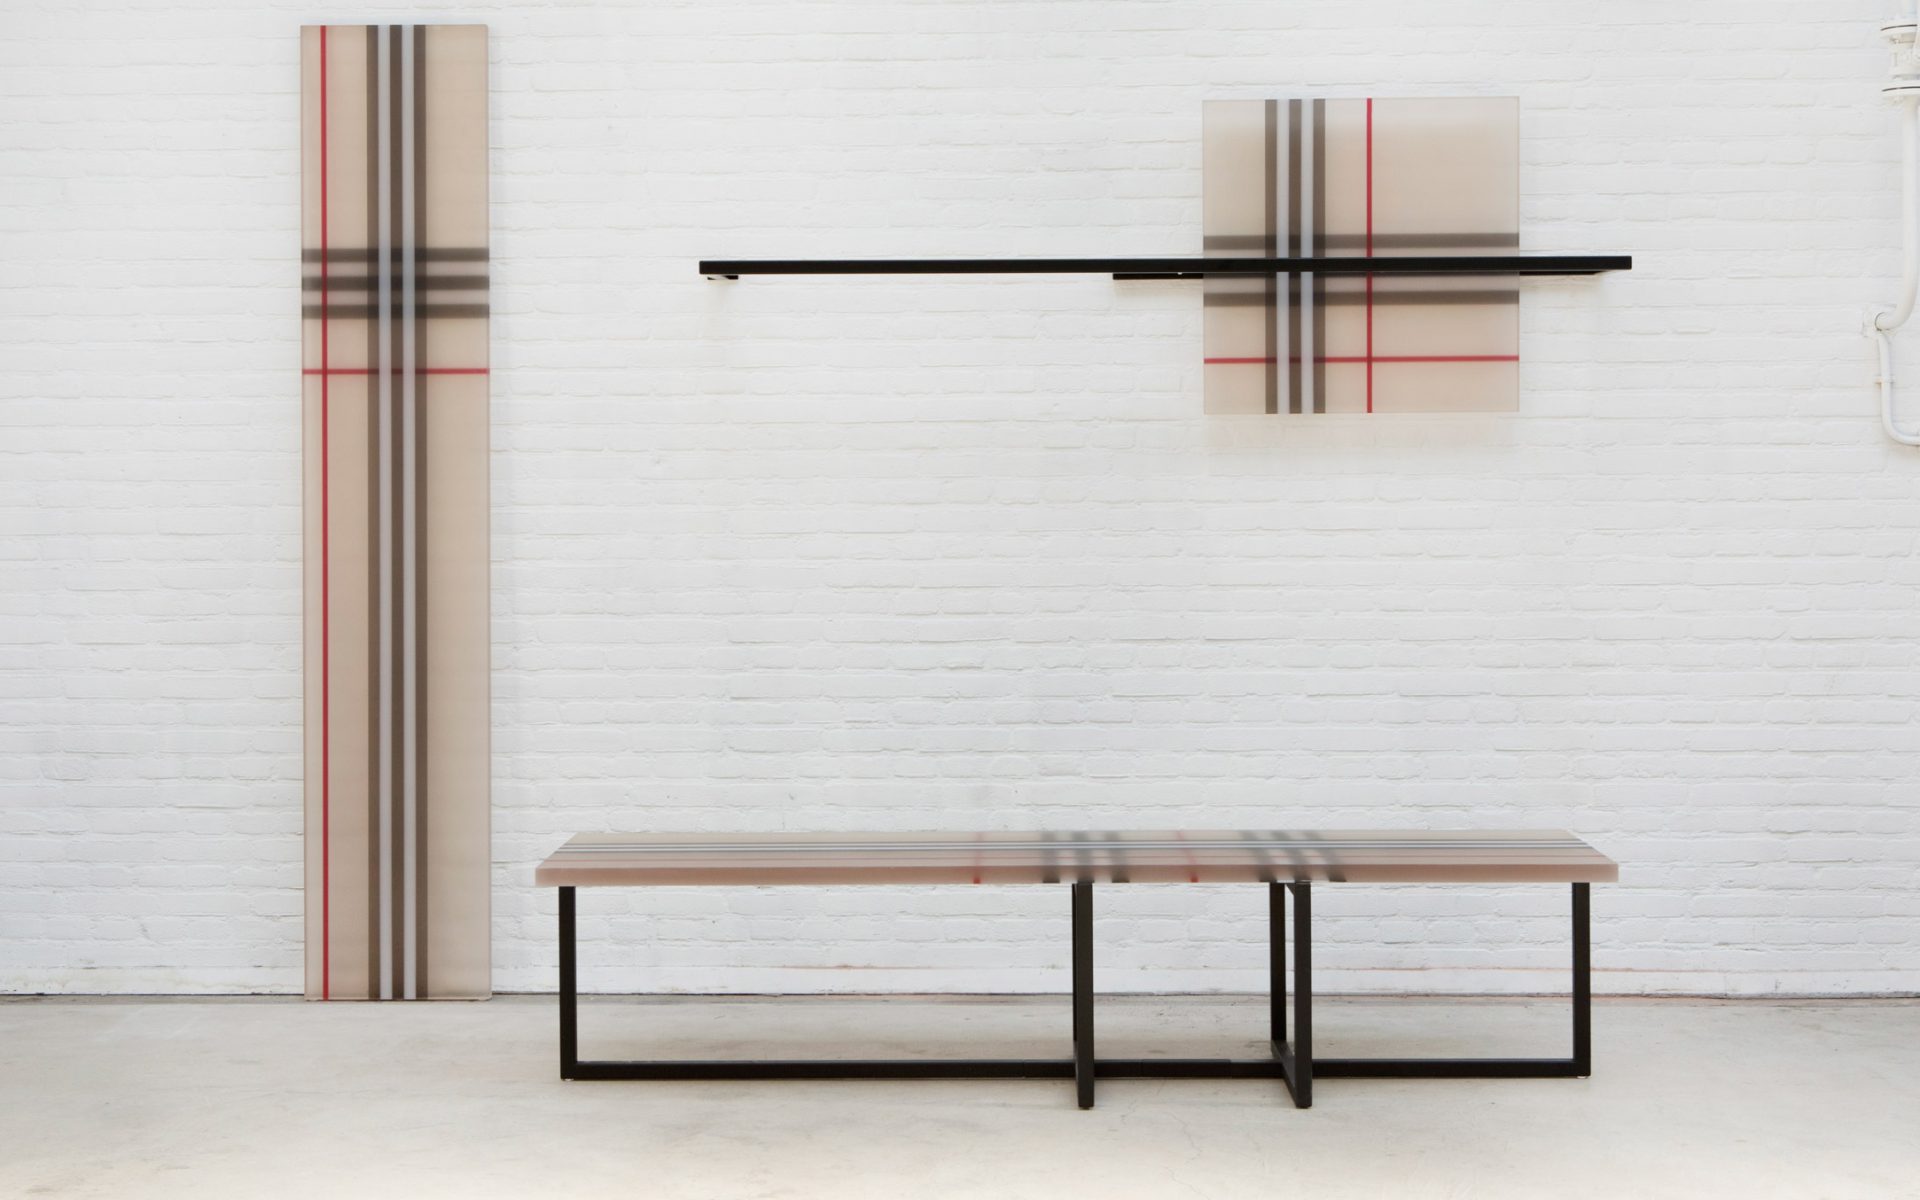 Special Patronize Centralize Burberry's Iconic Tartan Is Reimagined as Furniture - Galerie